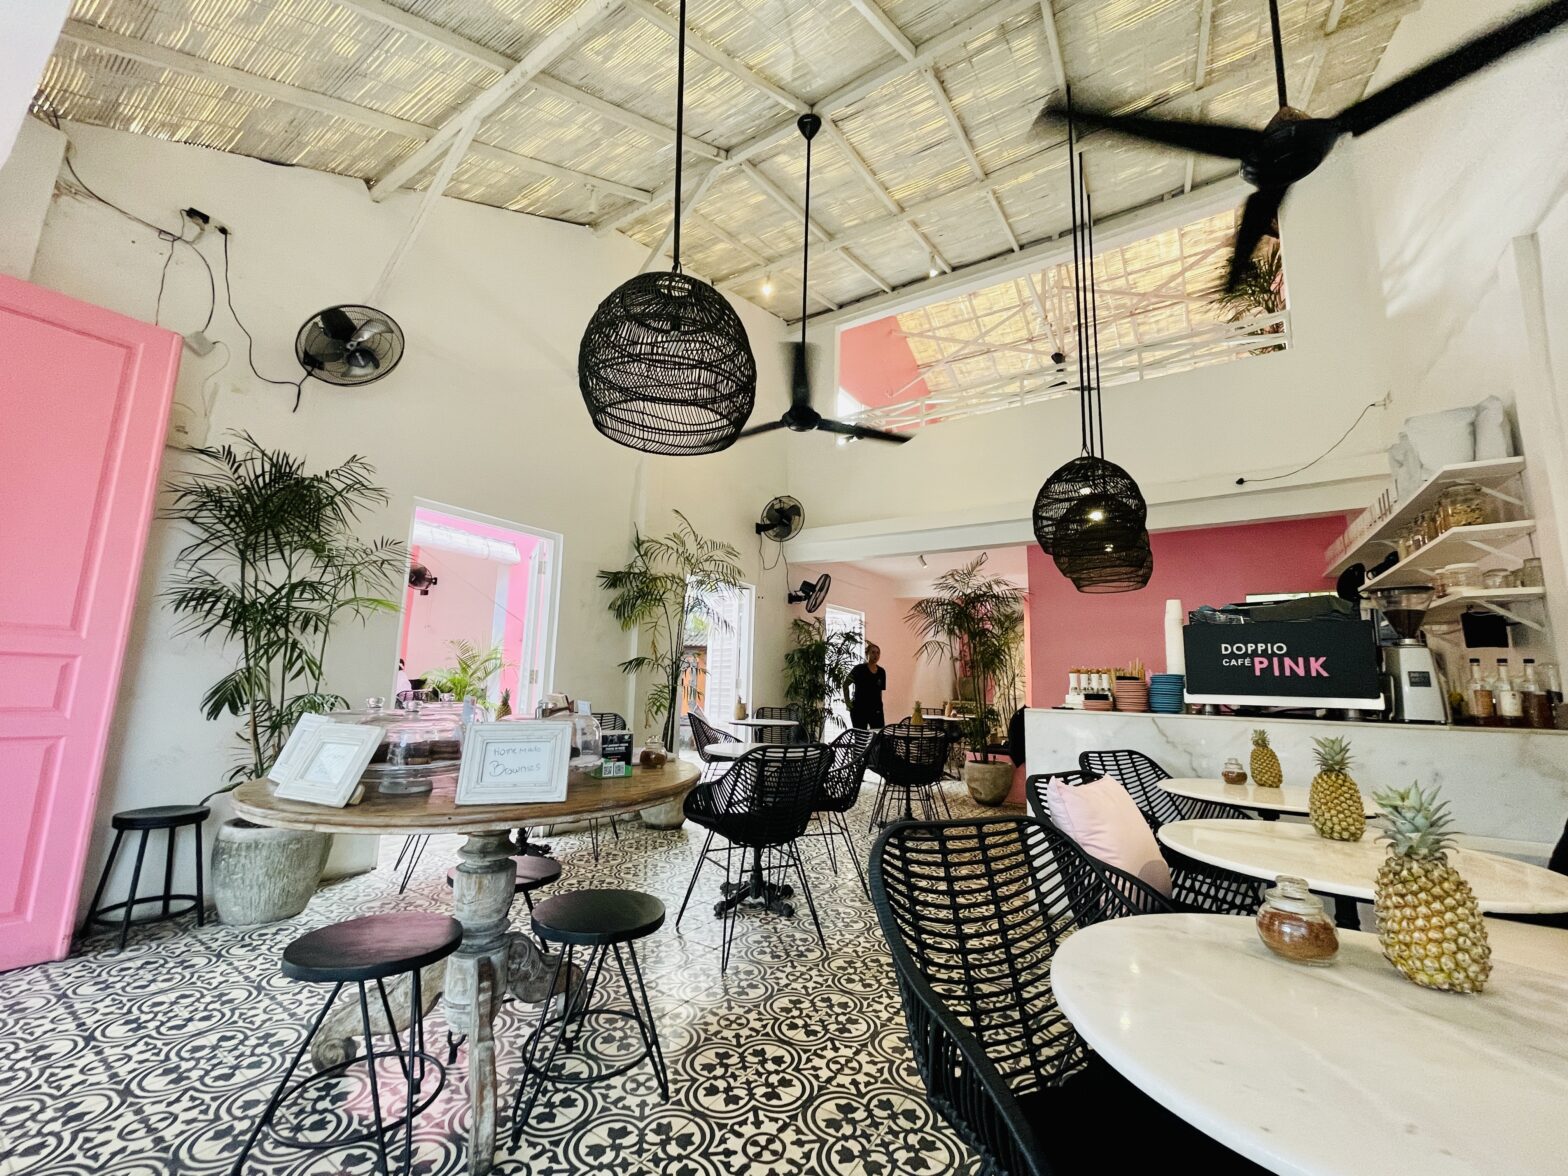 11 of the Most Beautiful Cafes You Must Visit in Bali